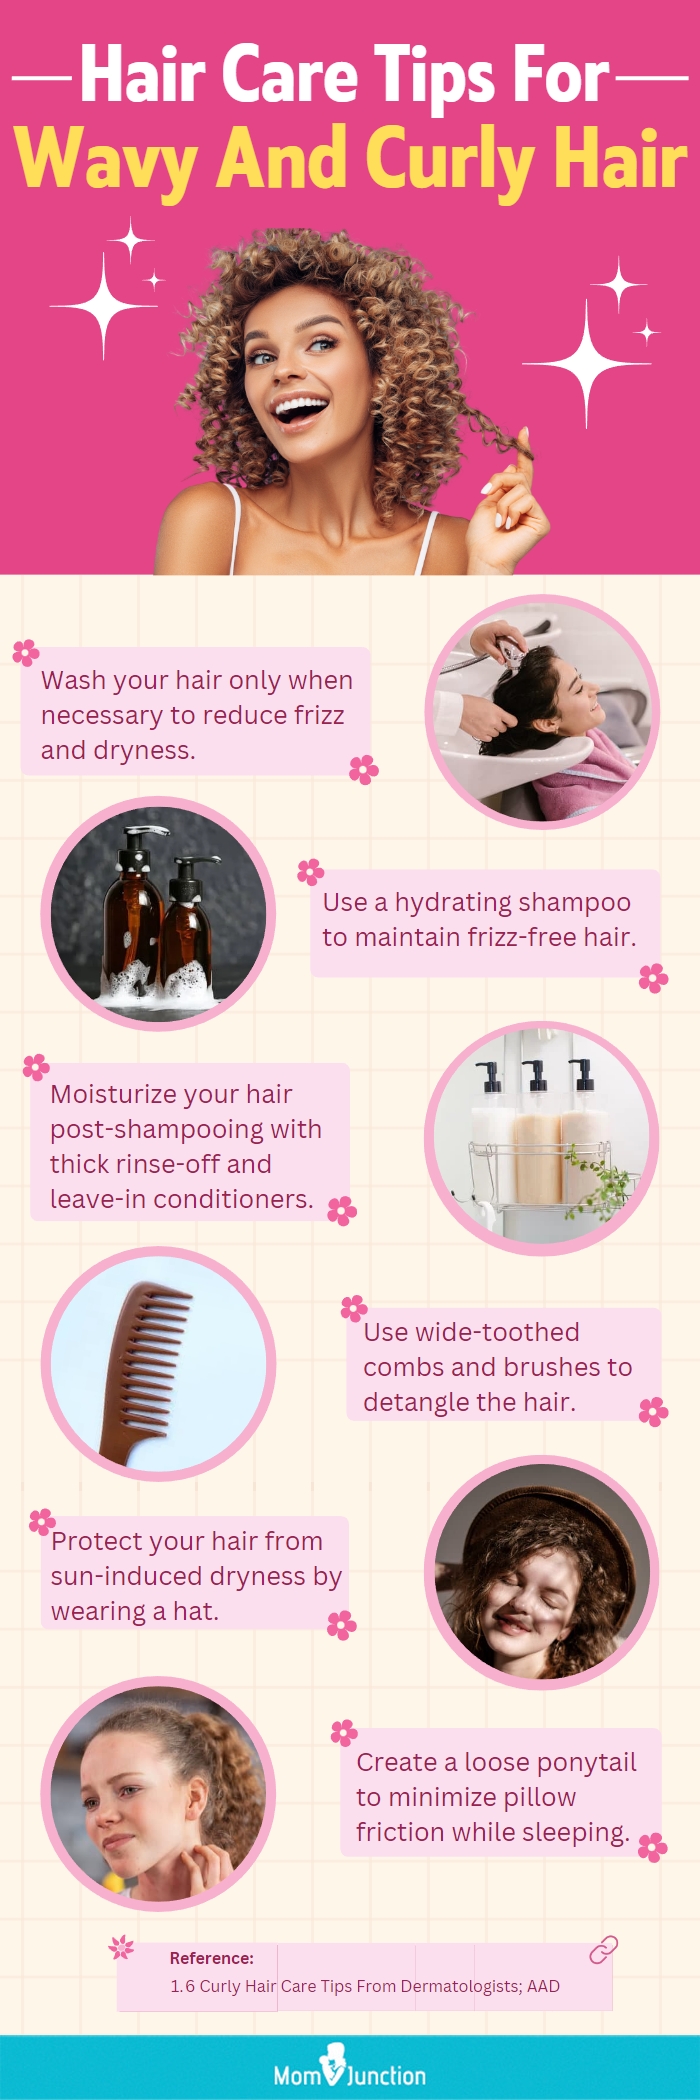 Your Guide to Effortless Hair - M.J. Capelli